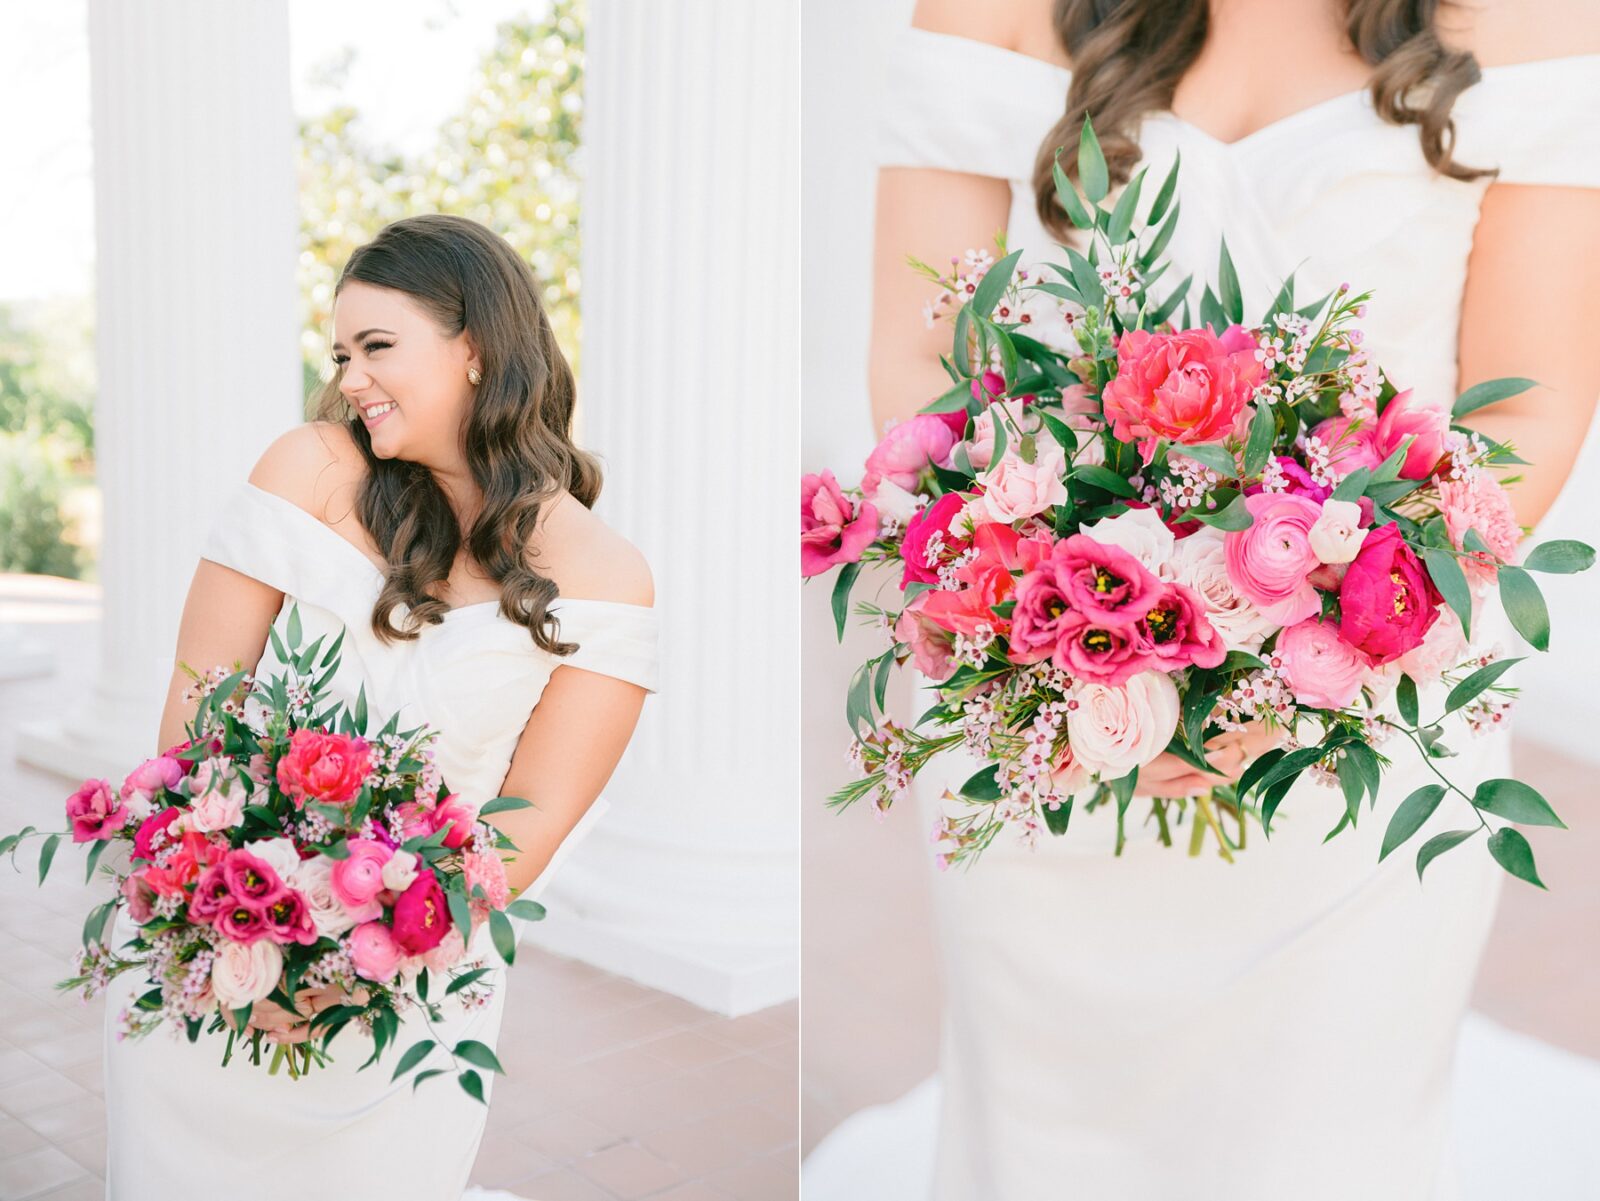 pink bridal bouquet, hot pink wedding bouquet, cone flower designs, austin wedding florist, spring wedding, texas wedding, large pink floral bouquet, bridal boUQUET, wedding at Woodbine mansion in round rock texas, wedding photos by Tara Lyons Photography, planning by The event shop